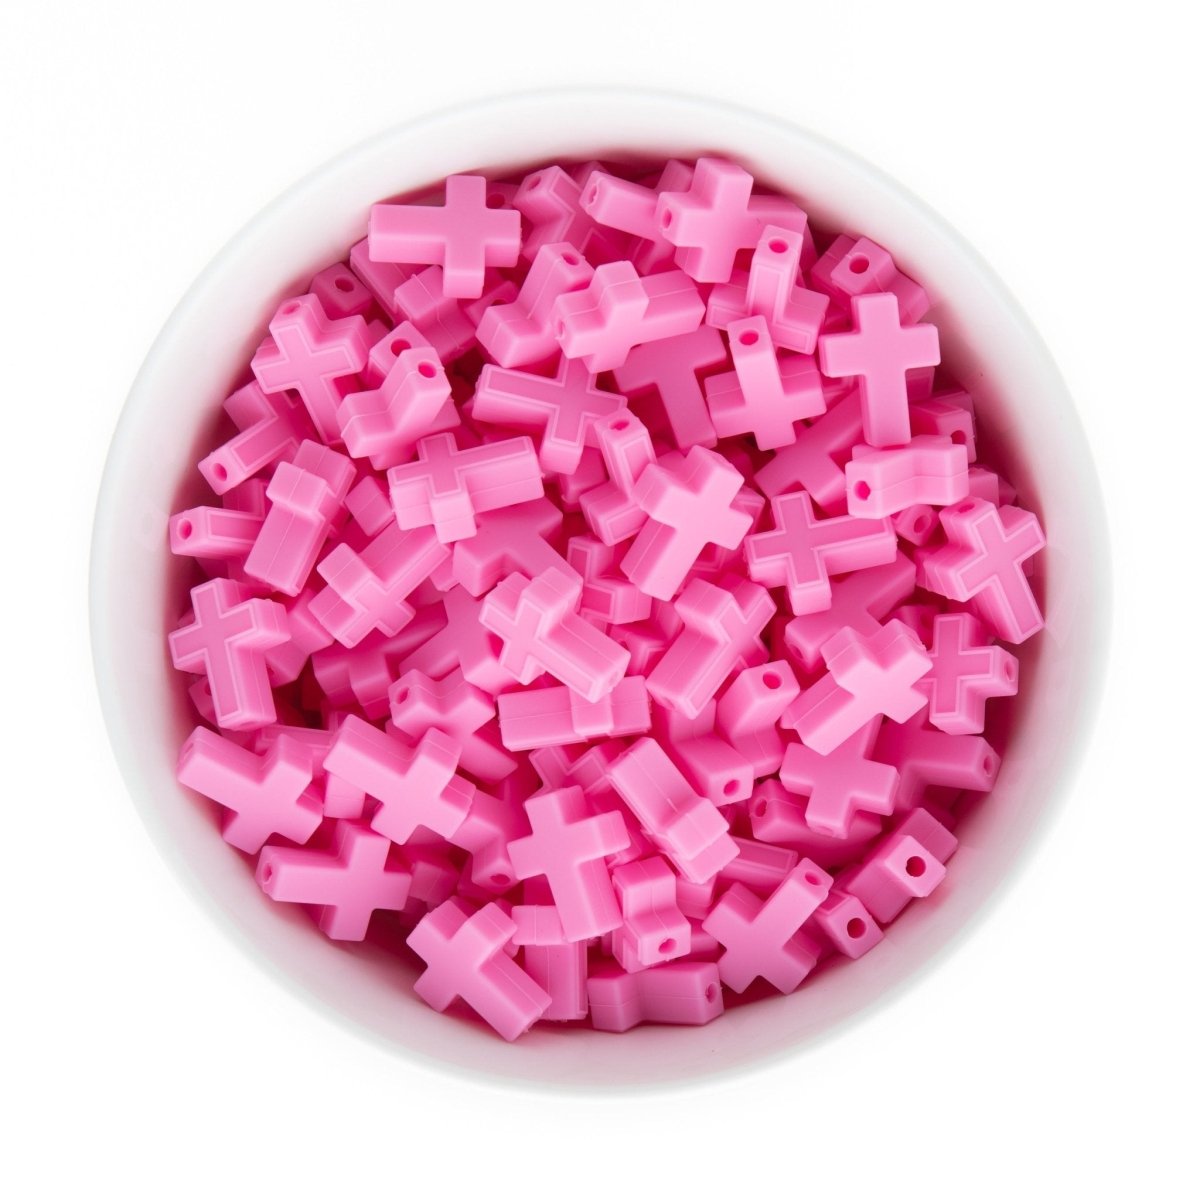 Silicone Focal Beads Crosses Cotton Candy Pink from Cara & Co Craft Supply